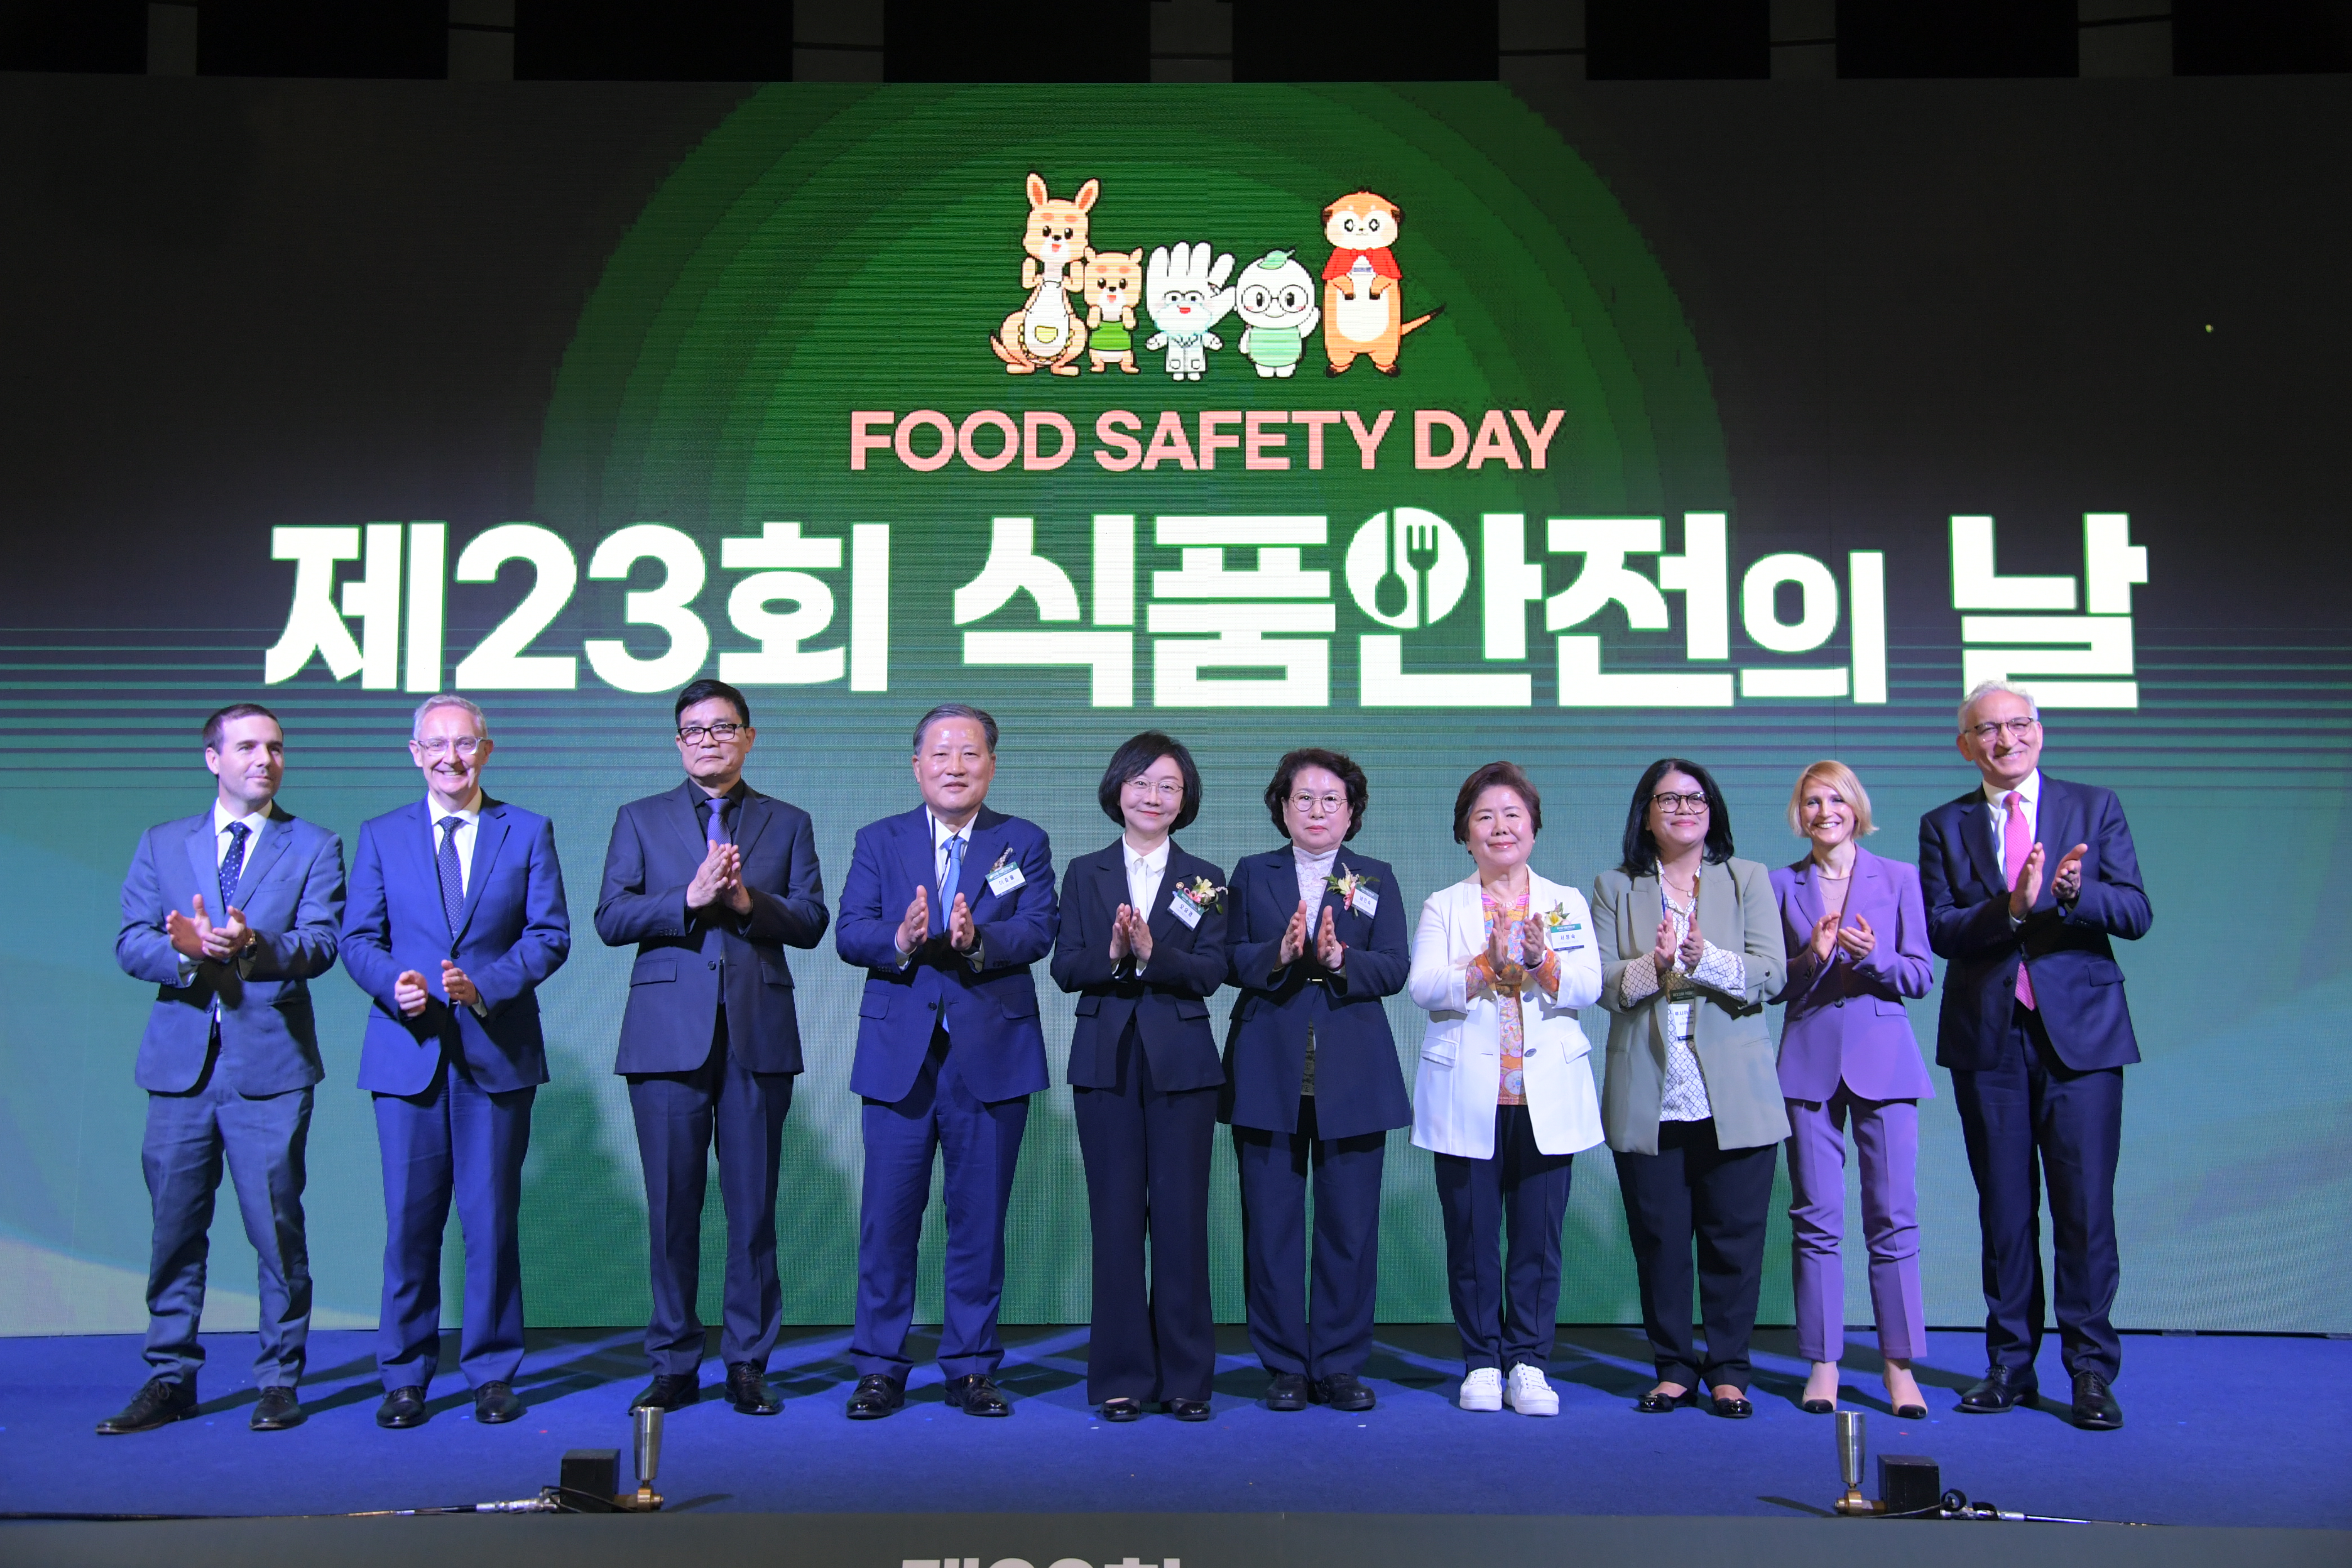 Photo News2 - 23rd Food Safety Day Commemoration Ceremony